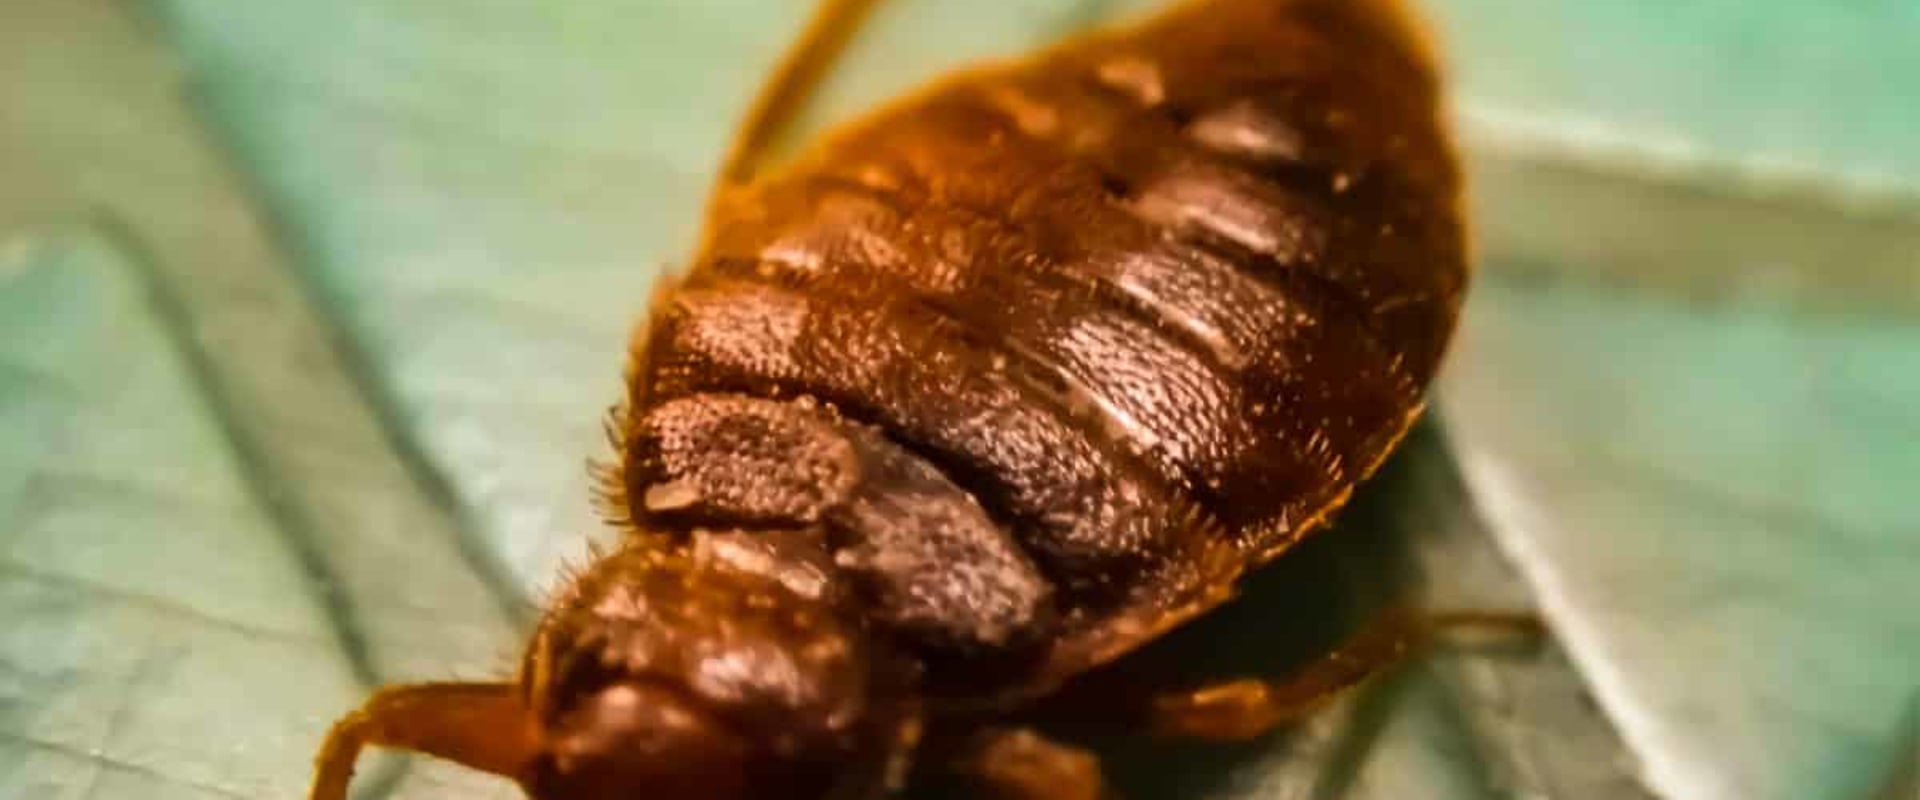 How long does it take to get rid of bed bugs after extermination?